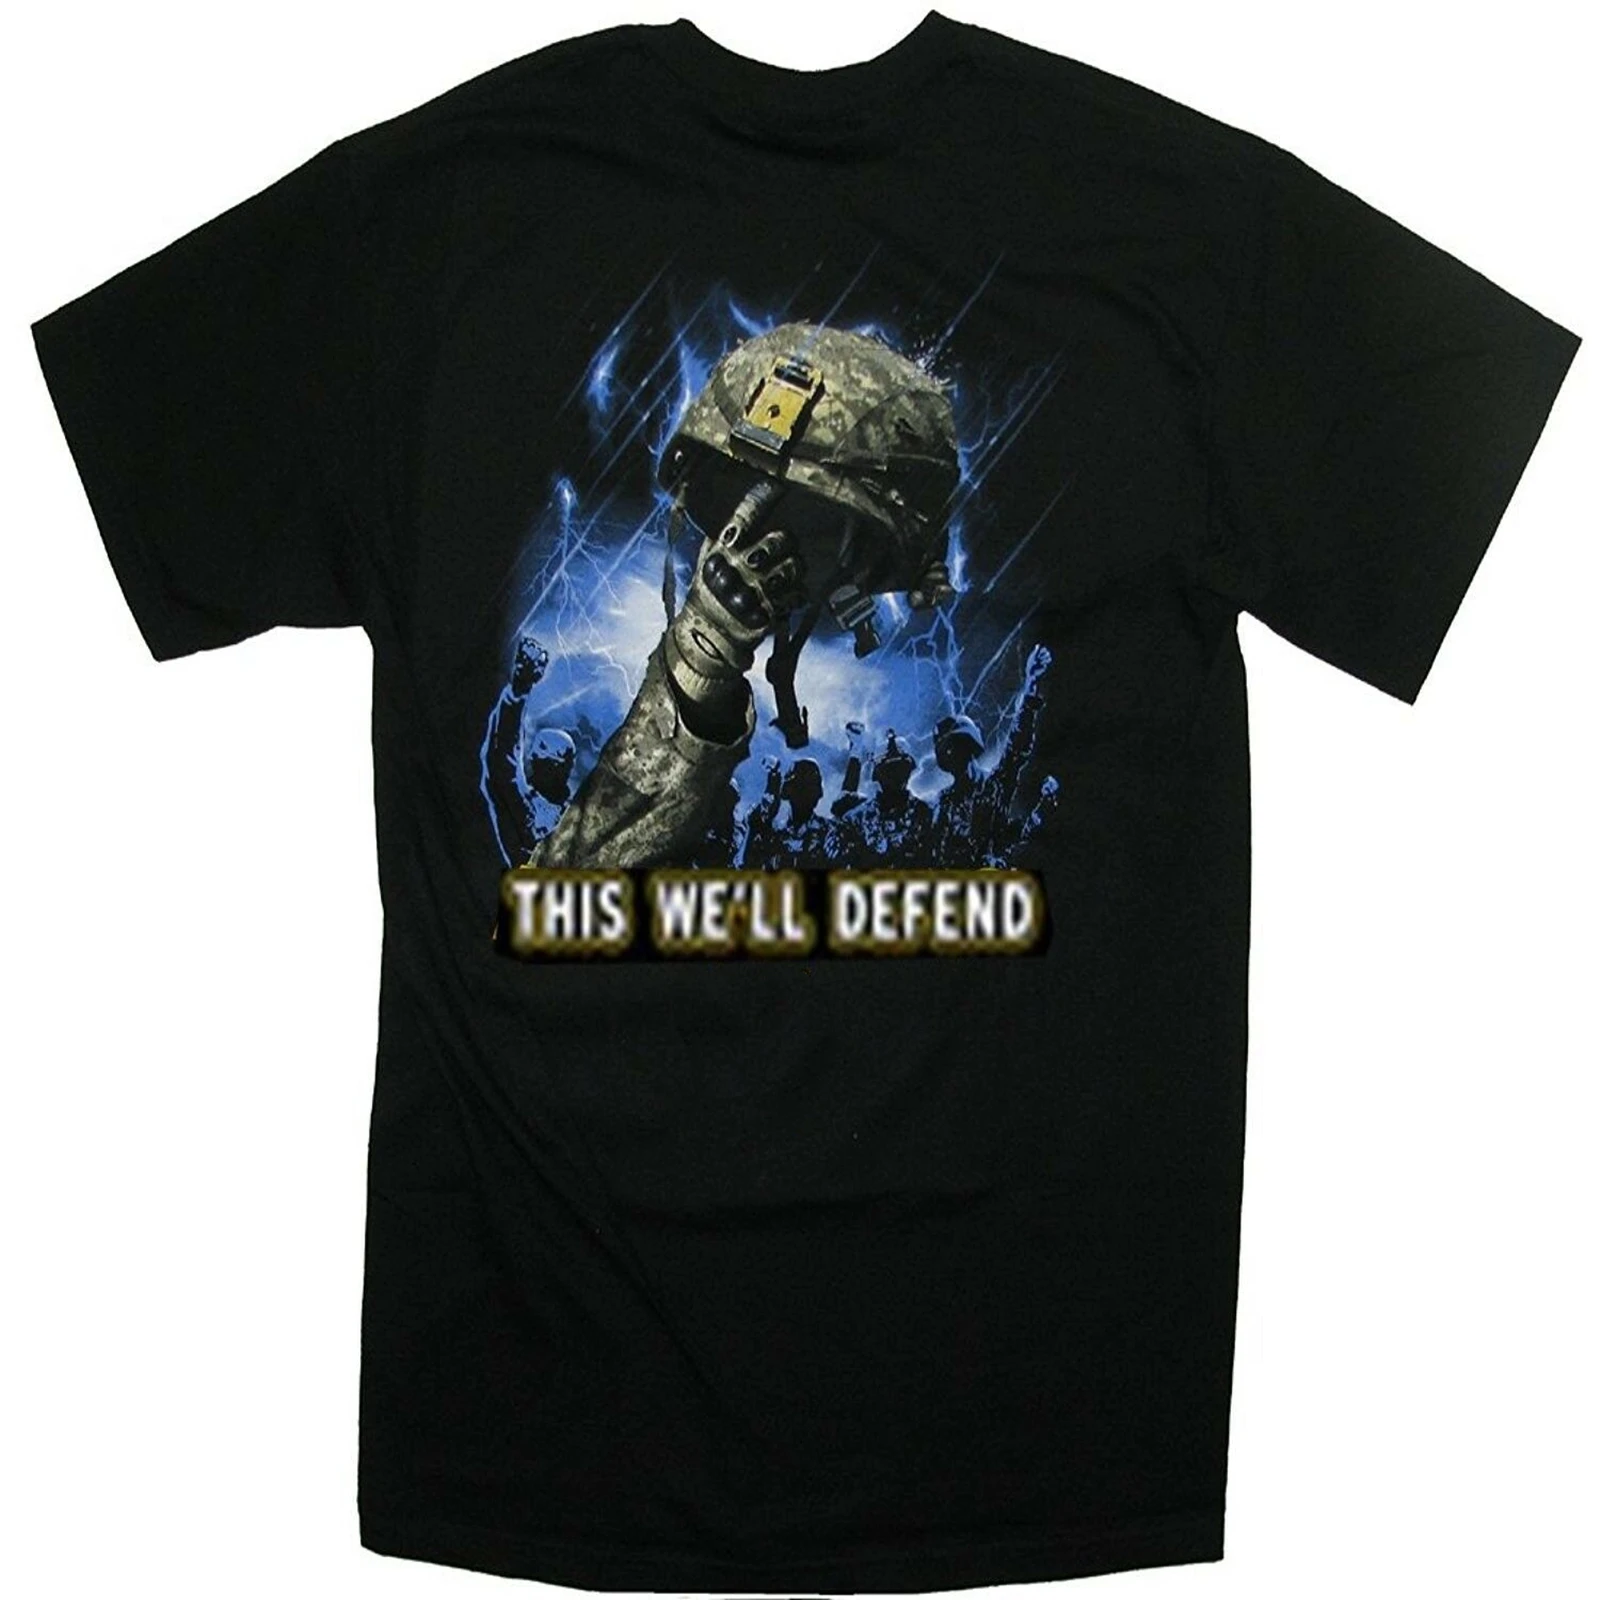 

United States Army this we'll defend Helmet Tee new T'shirt Men's Casual Cotton O-Neck Tees S-3XL